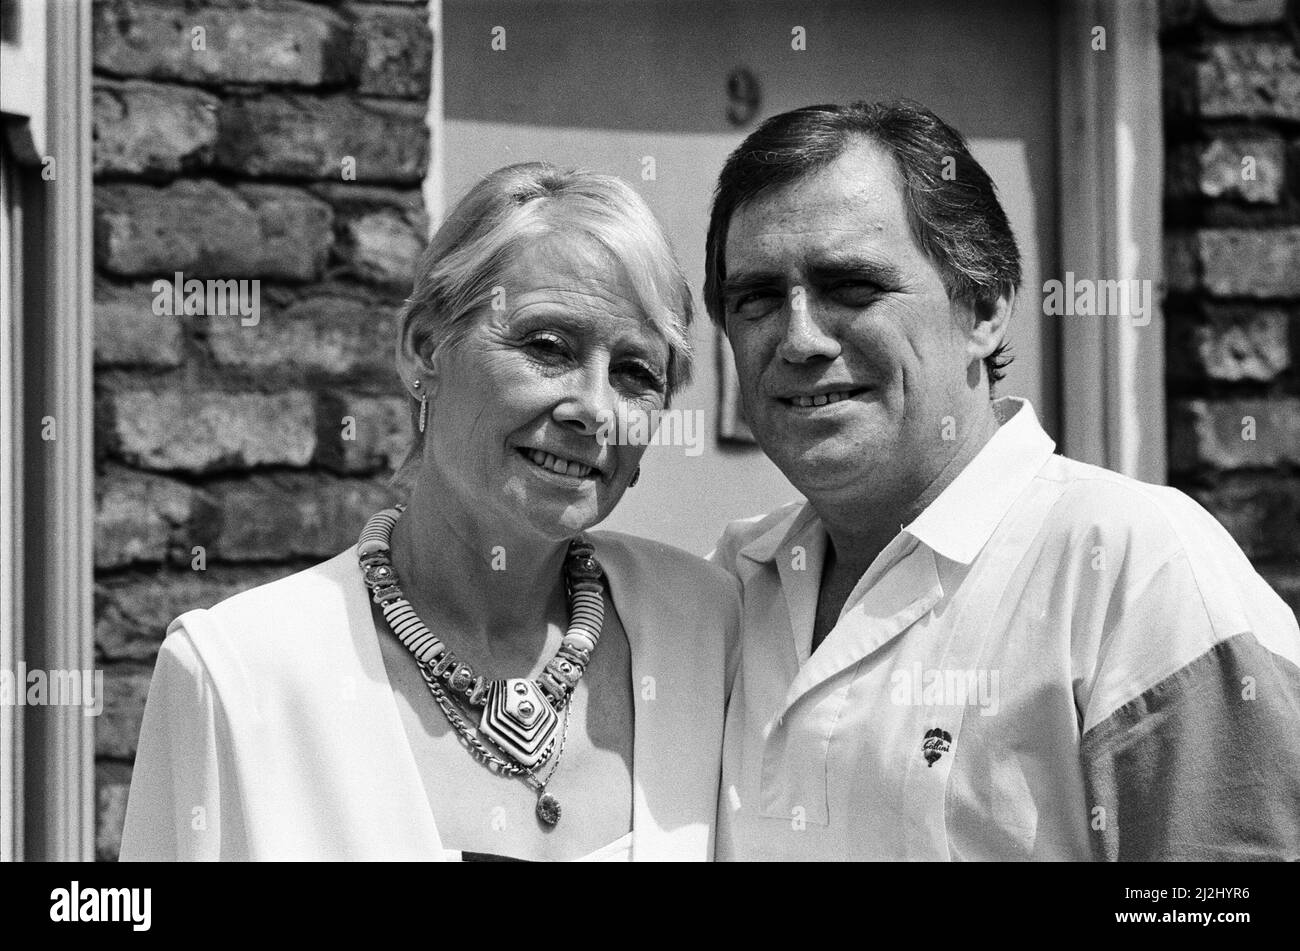 Actor Bill Tarmey (Jack Duckworth) is welcomed back to Granada TV's 'Coronation Street' by his ever loving screen wife Liz Dawn (Vera Duckworth). Bill has been absent from the soap for some months having undergone major heart surgery. 6th July 1987. Stock Photo